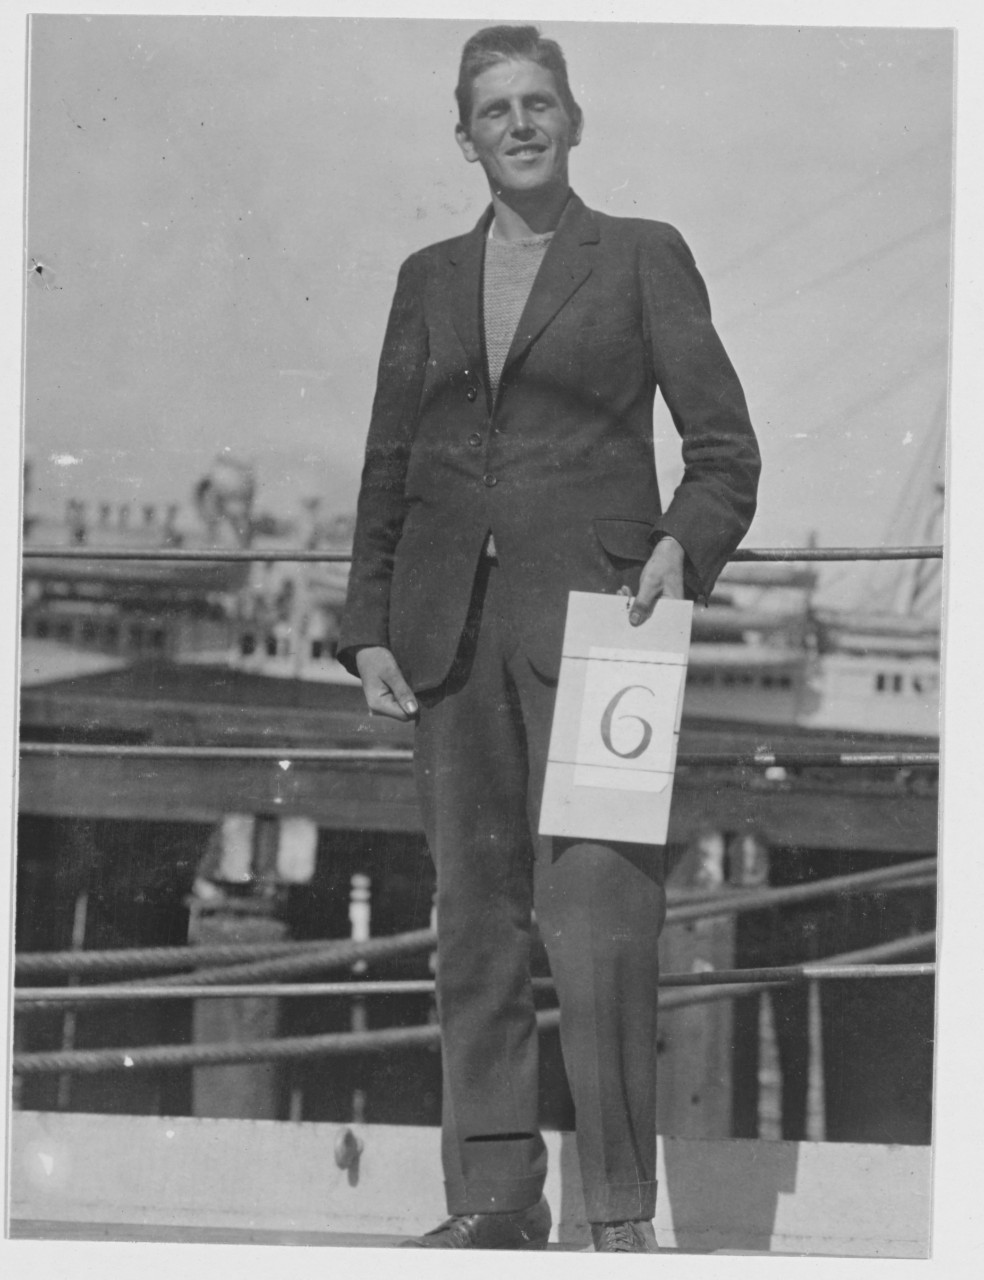 Gunnar Svensson, survivor of the Norwegian Bark "NORDHAV", sunk by submarine August 17, 1918, 120 miles ESE Cape Henry. Rating A.B, Age 22 years. Nationality - Russian Finn. Rescued August 18, 1918, by USS KEARSARGE (BB-5) - brought to Boston, August 20, 1918.